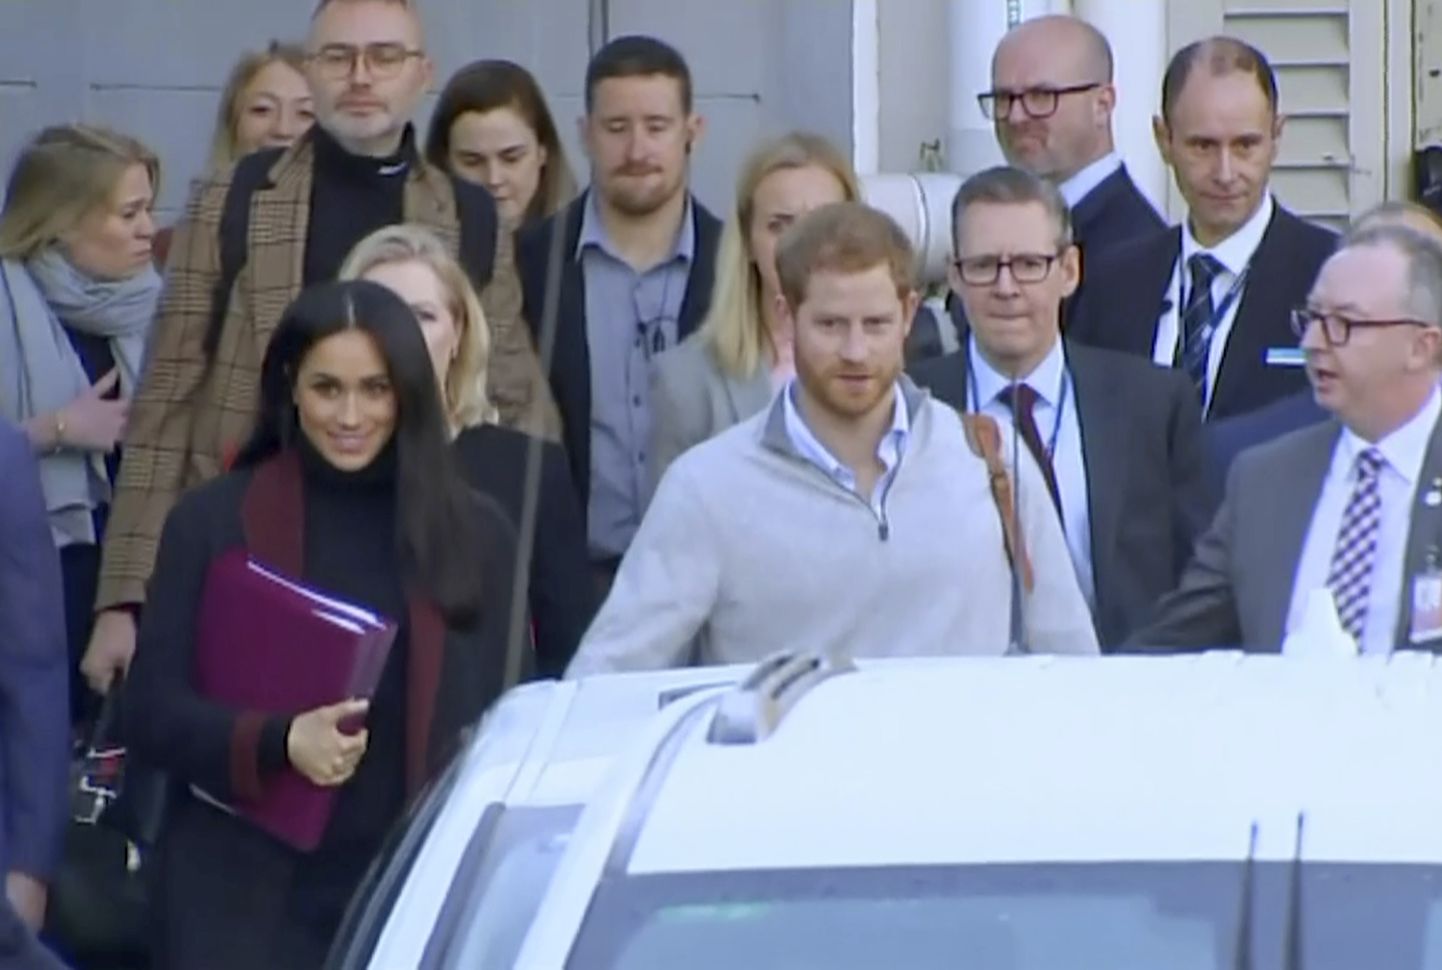 Britain's Prince Harry, center right, and his wife Meghan, center left, Duke and Duchess of Sussex, approach a car at an airport in Sydney, Monday, Oct. 15, 2018. Prince Harry and his wife Meghan arrived in Sydney on Monday, a day before they officially start a 16-day tour of Australia and the South Pacific.(Australian Pool via AP)